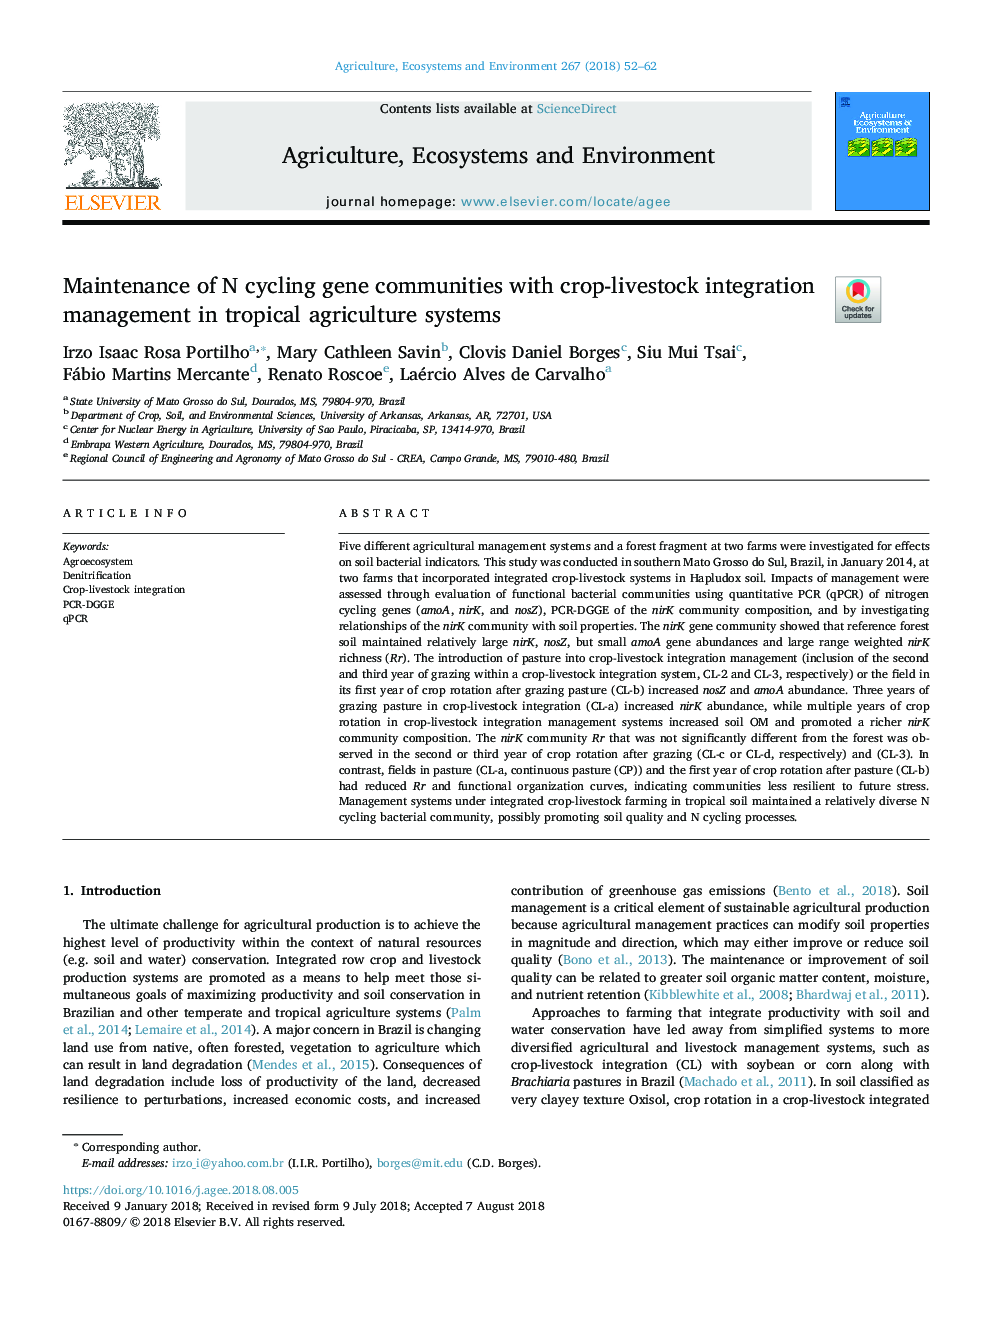 Maintenance of N cycling gene communities with crop-livestock integration management in tropical agriculture systems